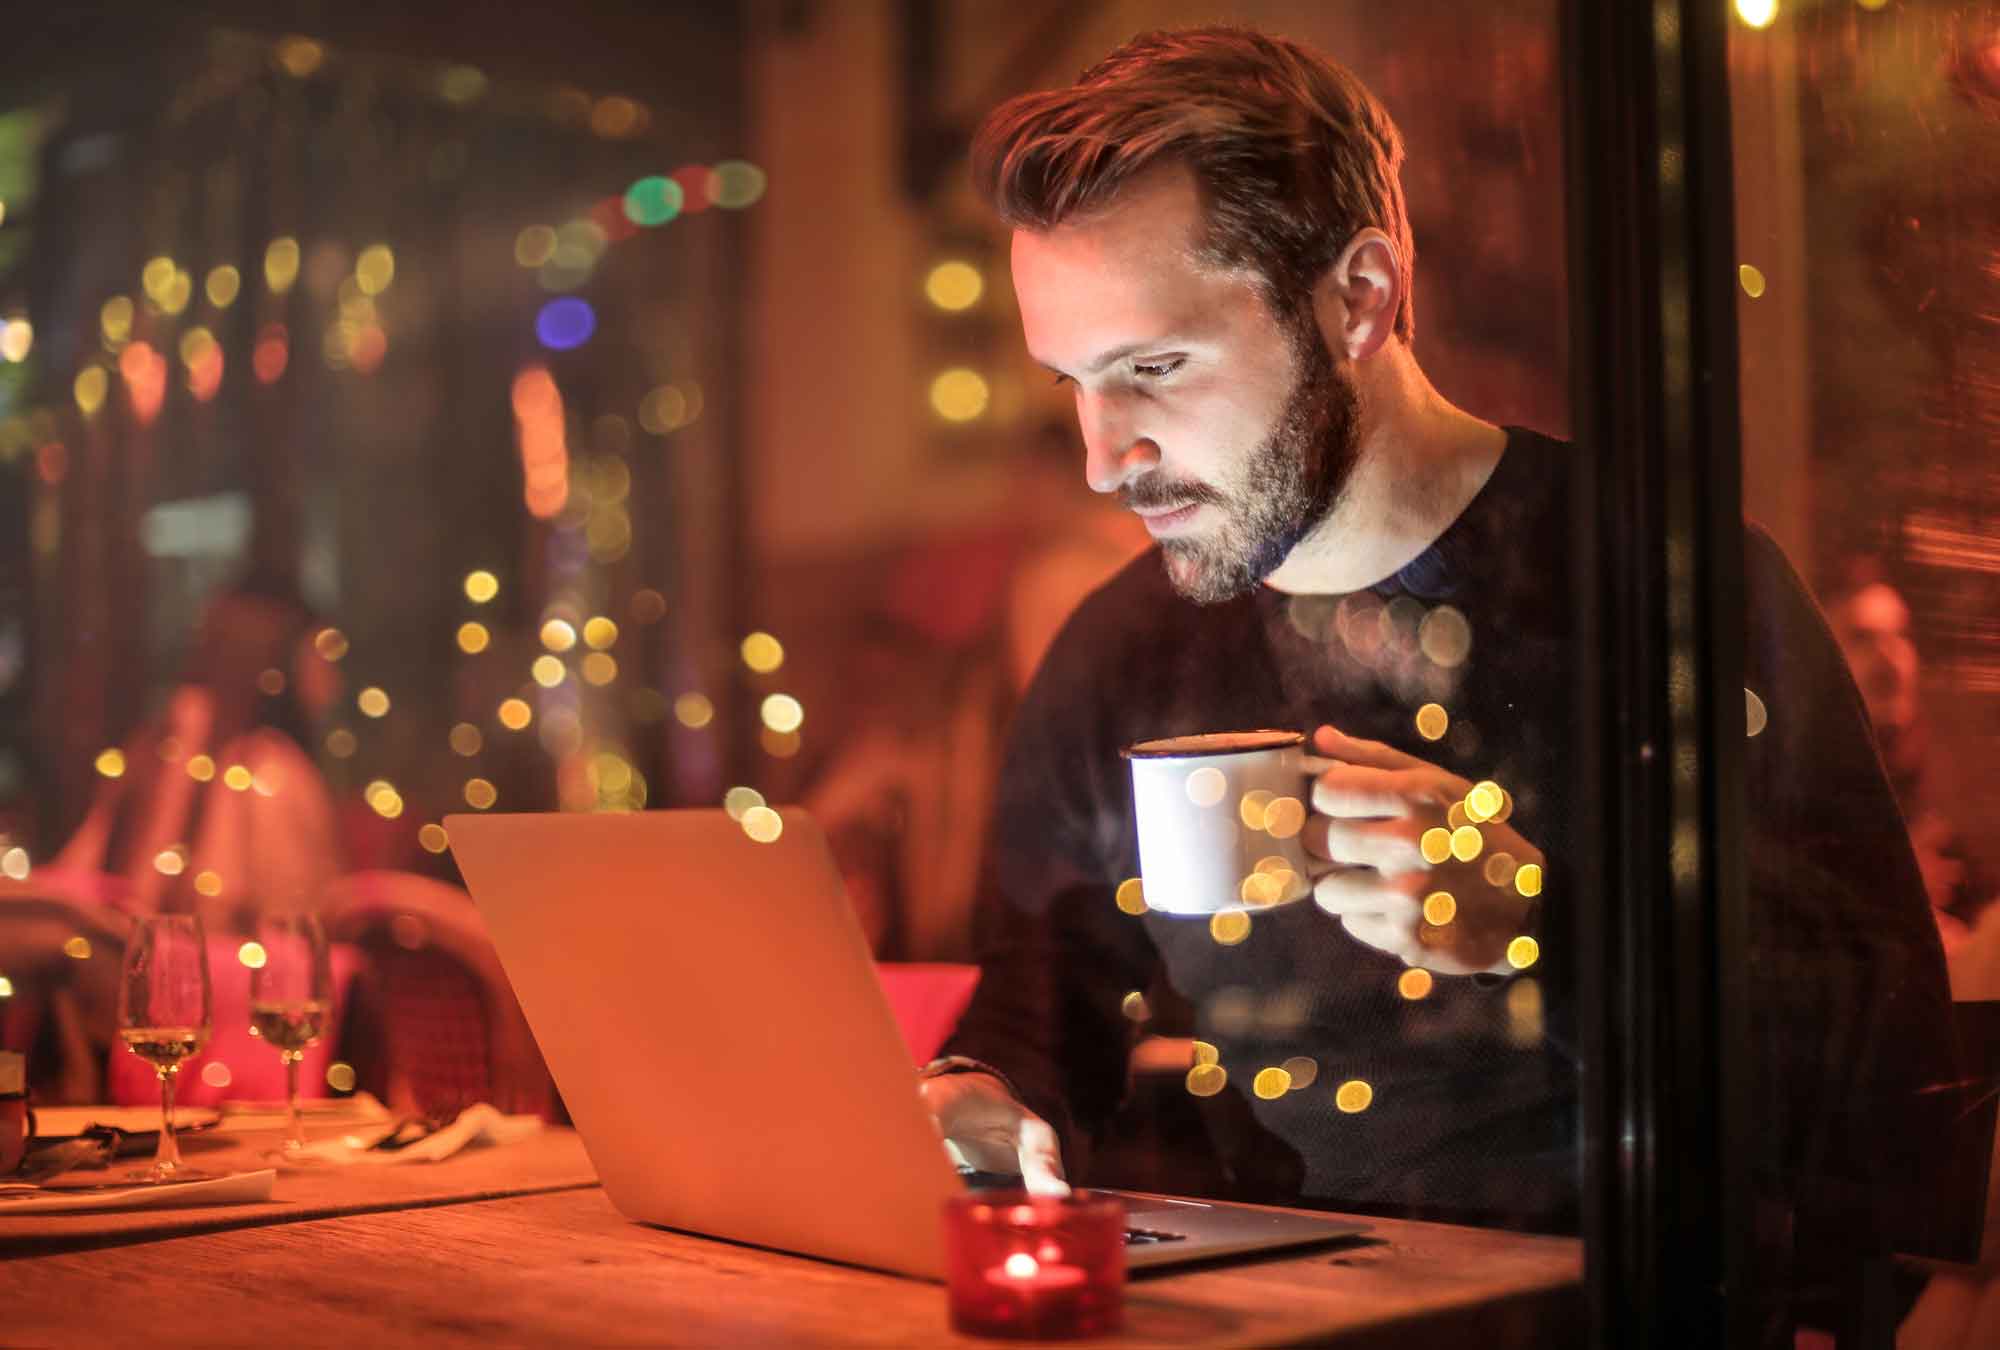 6 Mistakes Everyone Makes When Working Online From Home